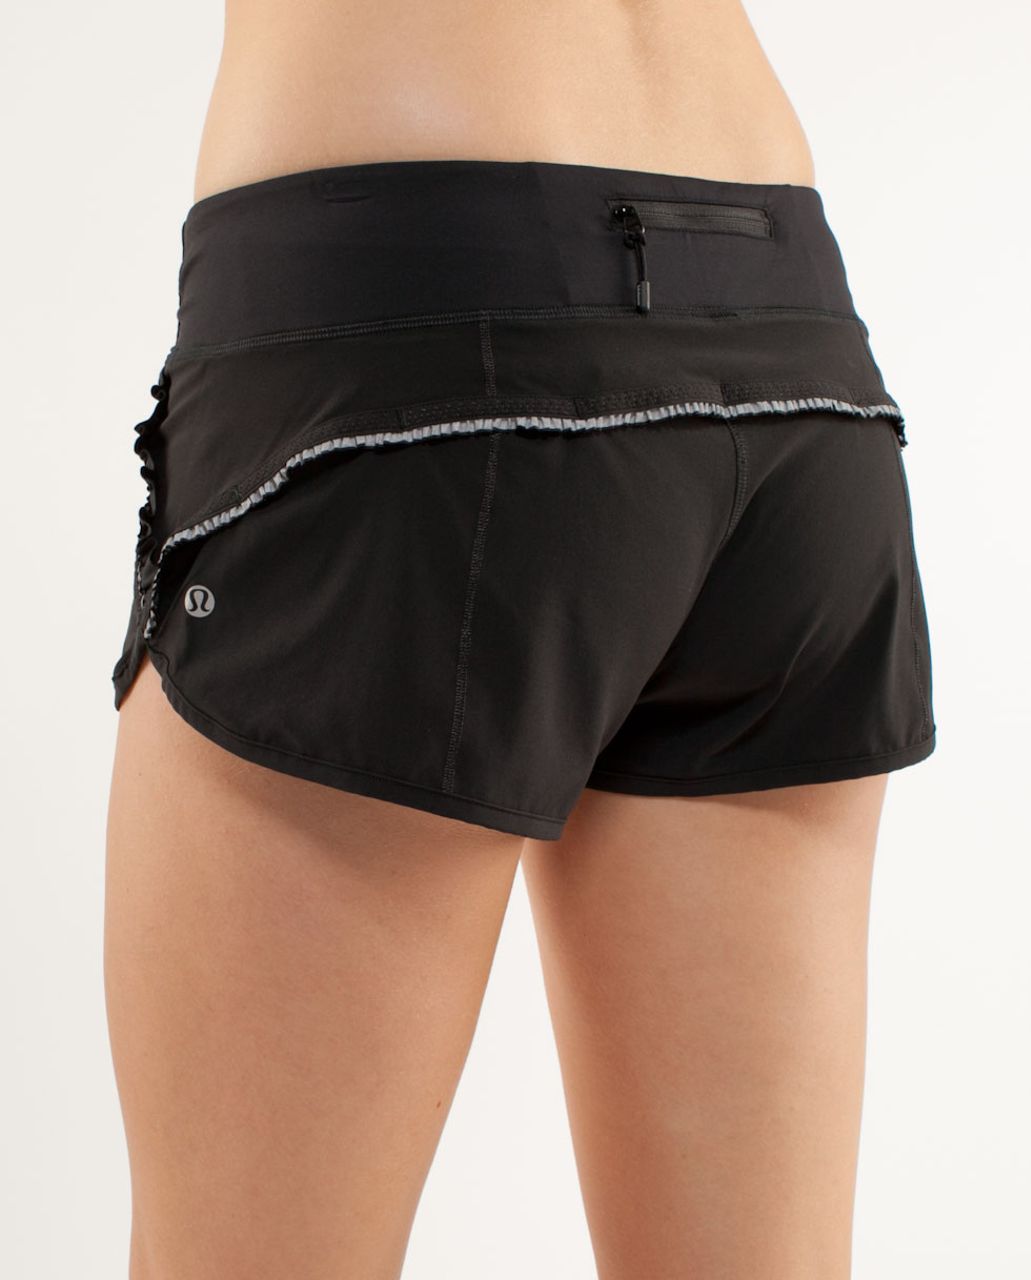 Lululemon Black Shorts with Accordion Ruffle Side with Liner Women's Size 8